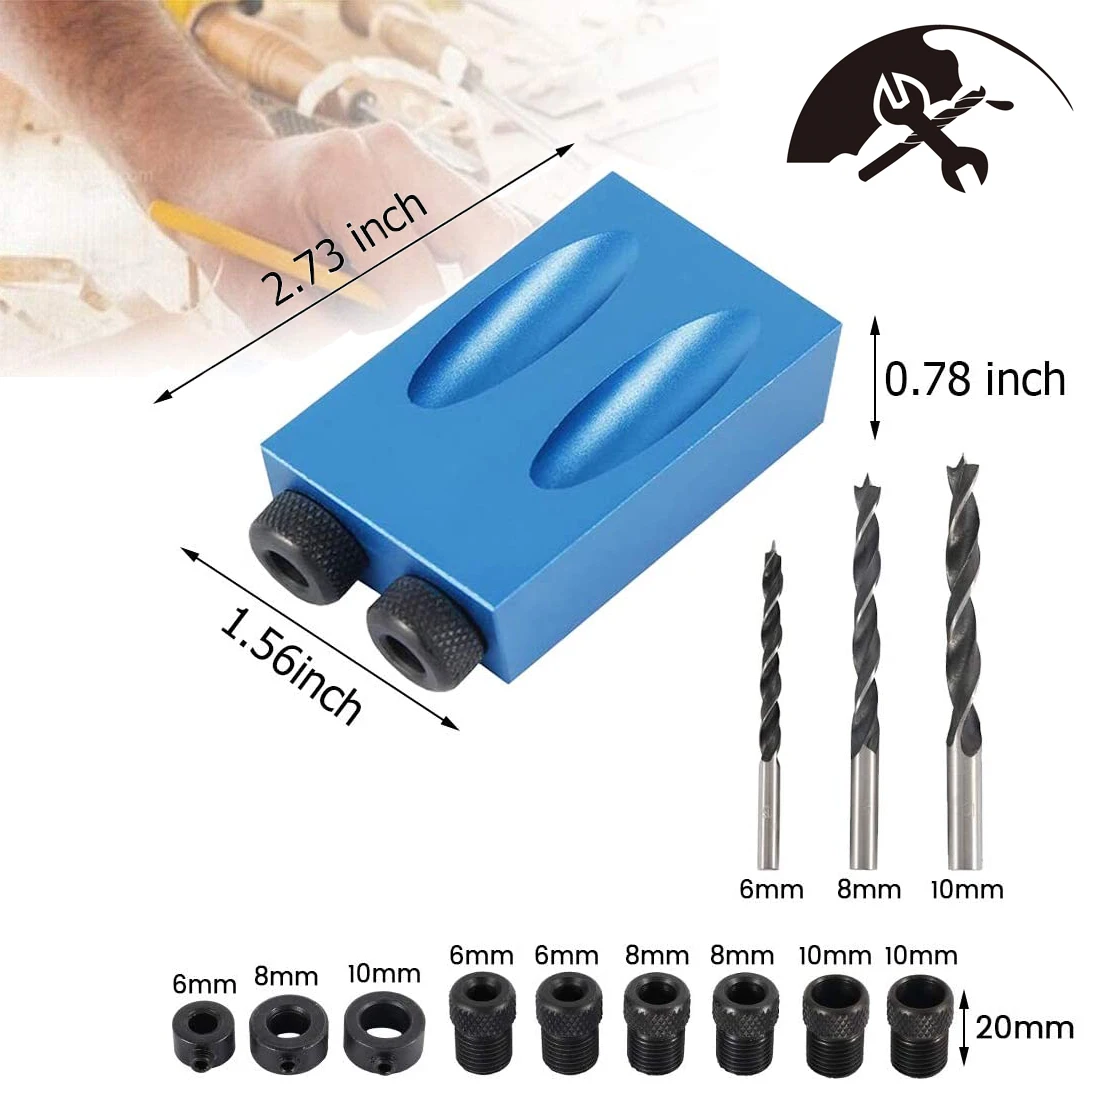 

14pcs Oblique Hole Locator Drill Bit Woodworking Pocket Hole Jig Kit Angle Drill Guide Set Hole Puncher DIY Carpentry Tool